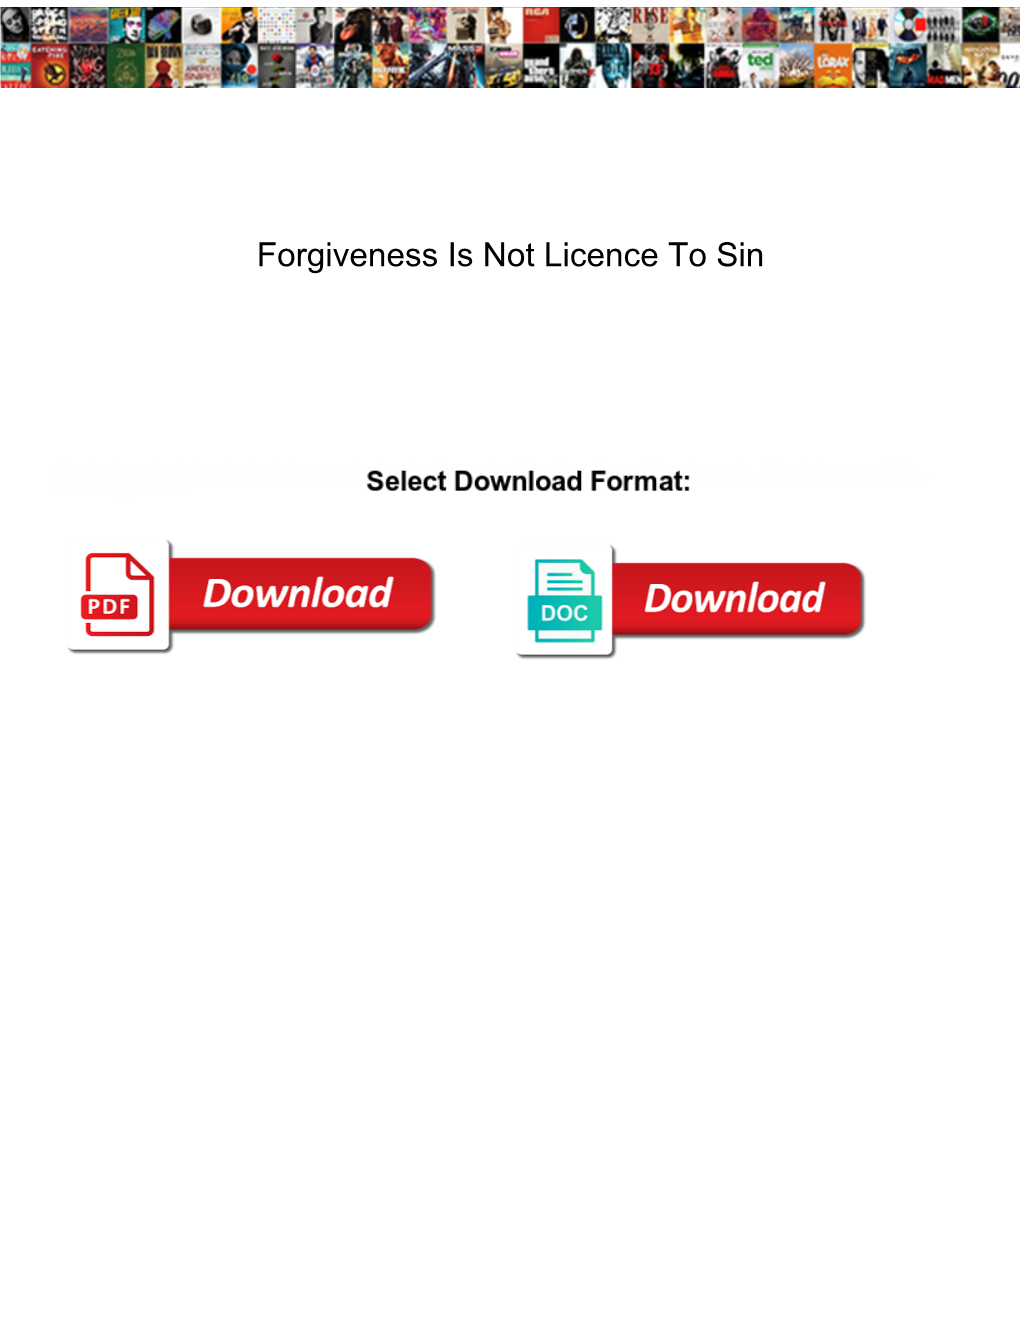 Forgiveness Is Not Licence to Sin